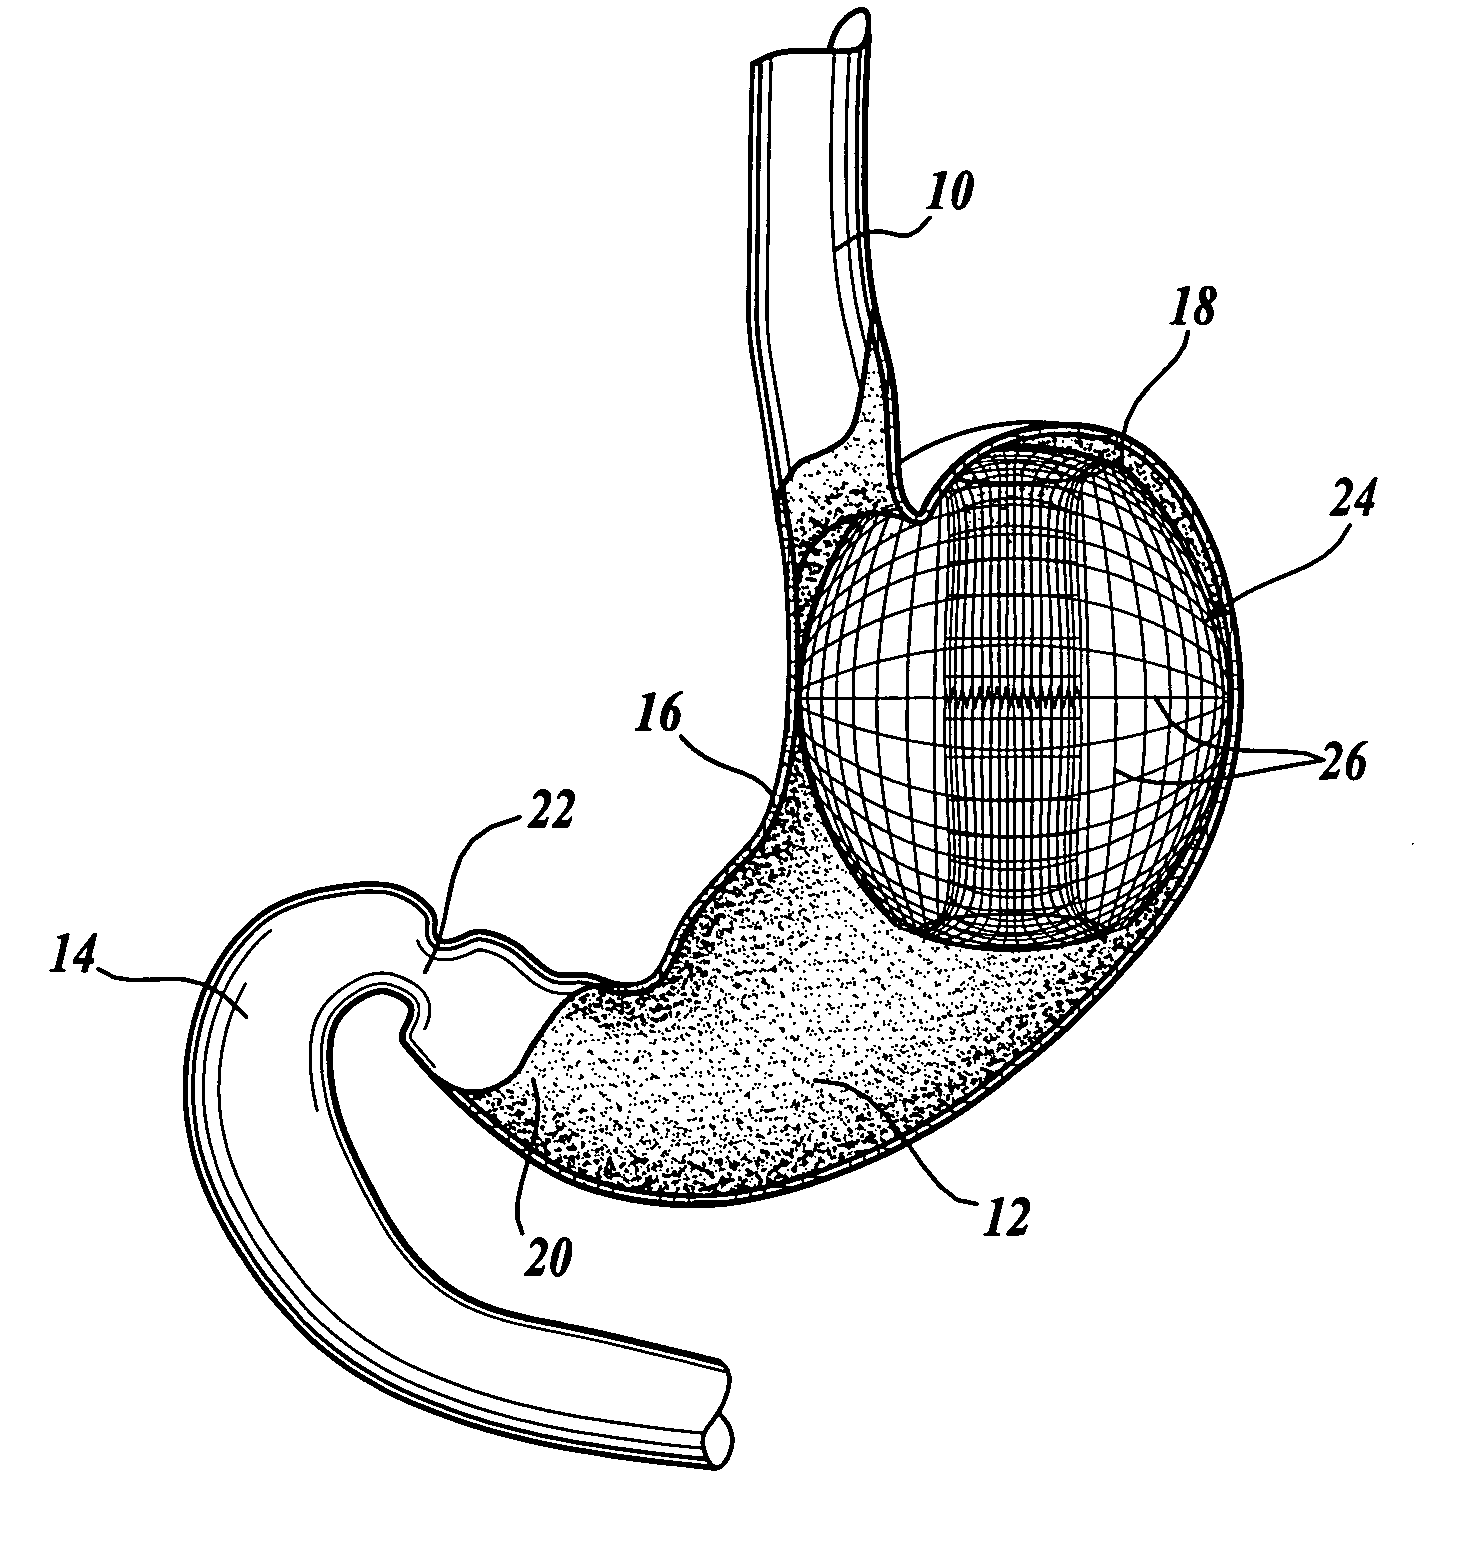 Intragastric prosthesis for the treatment of morbid obesity